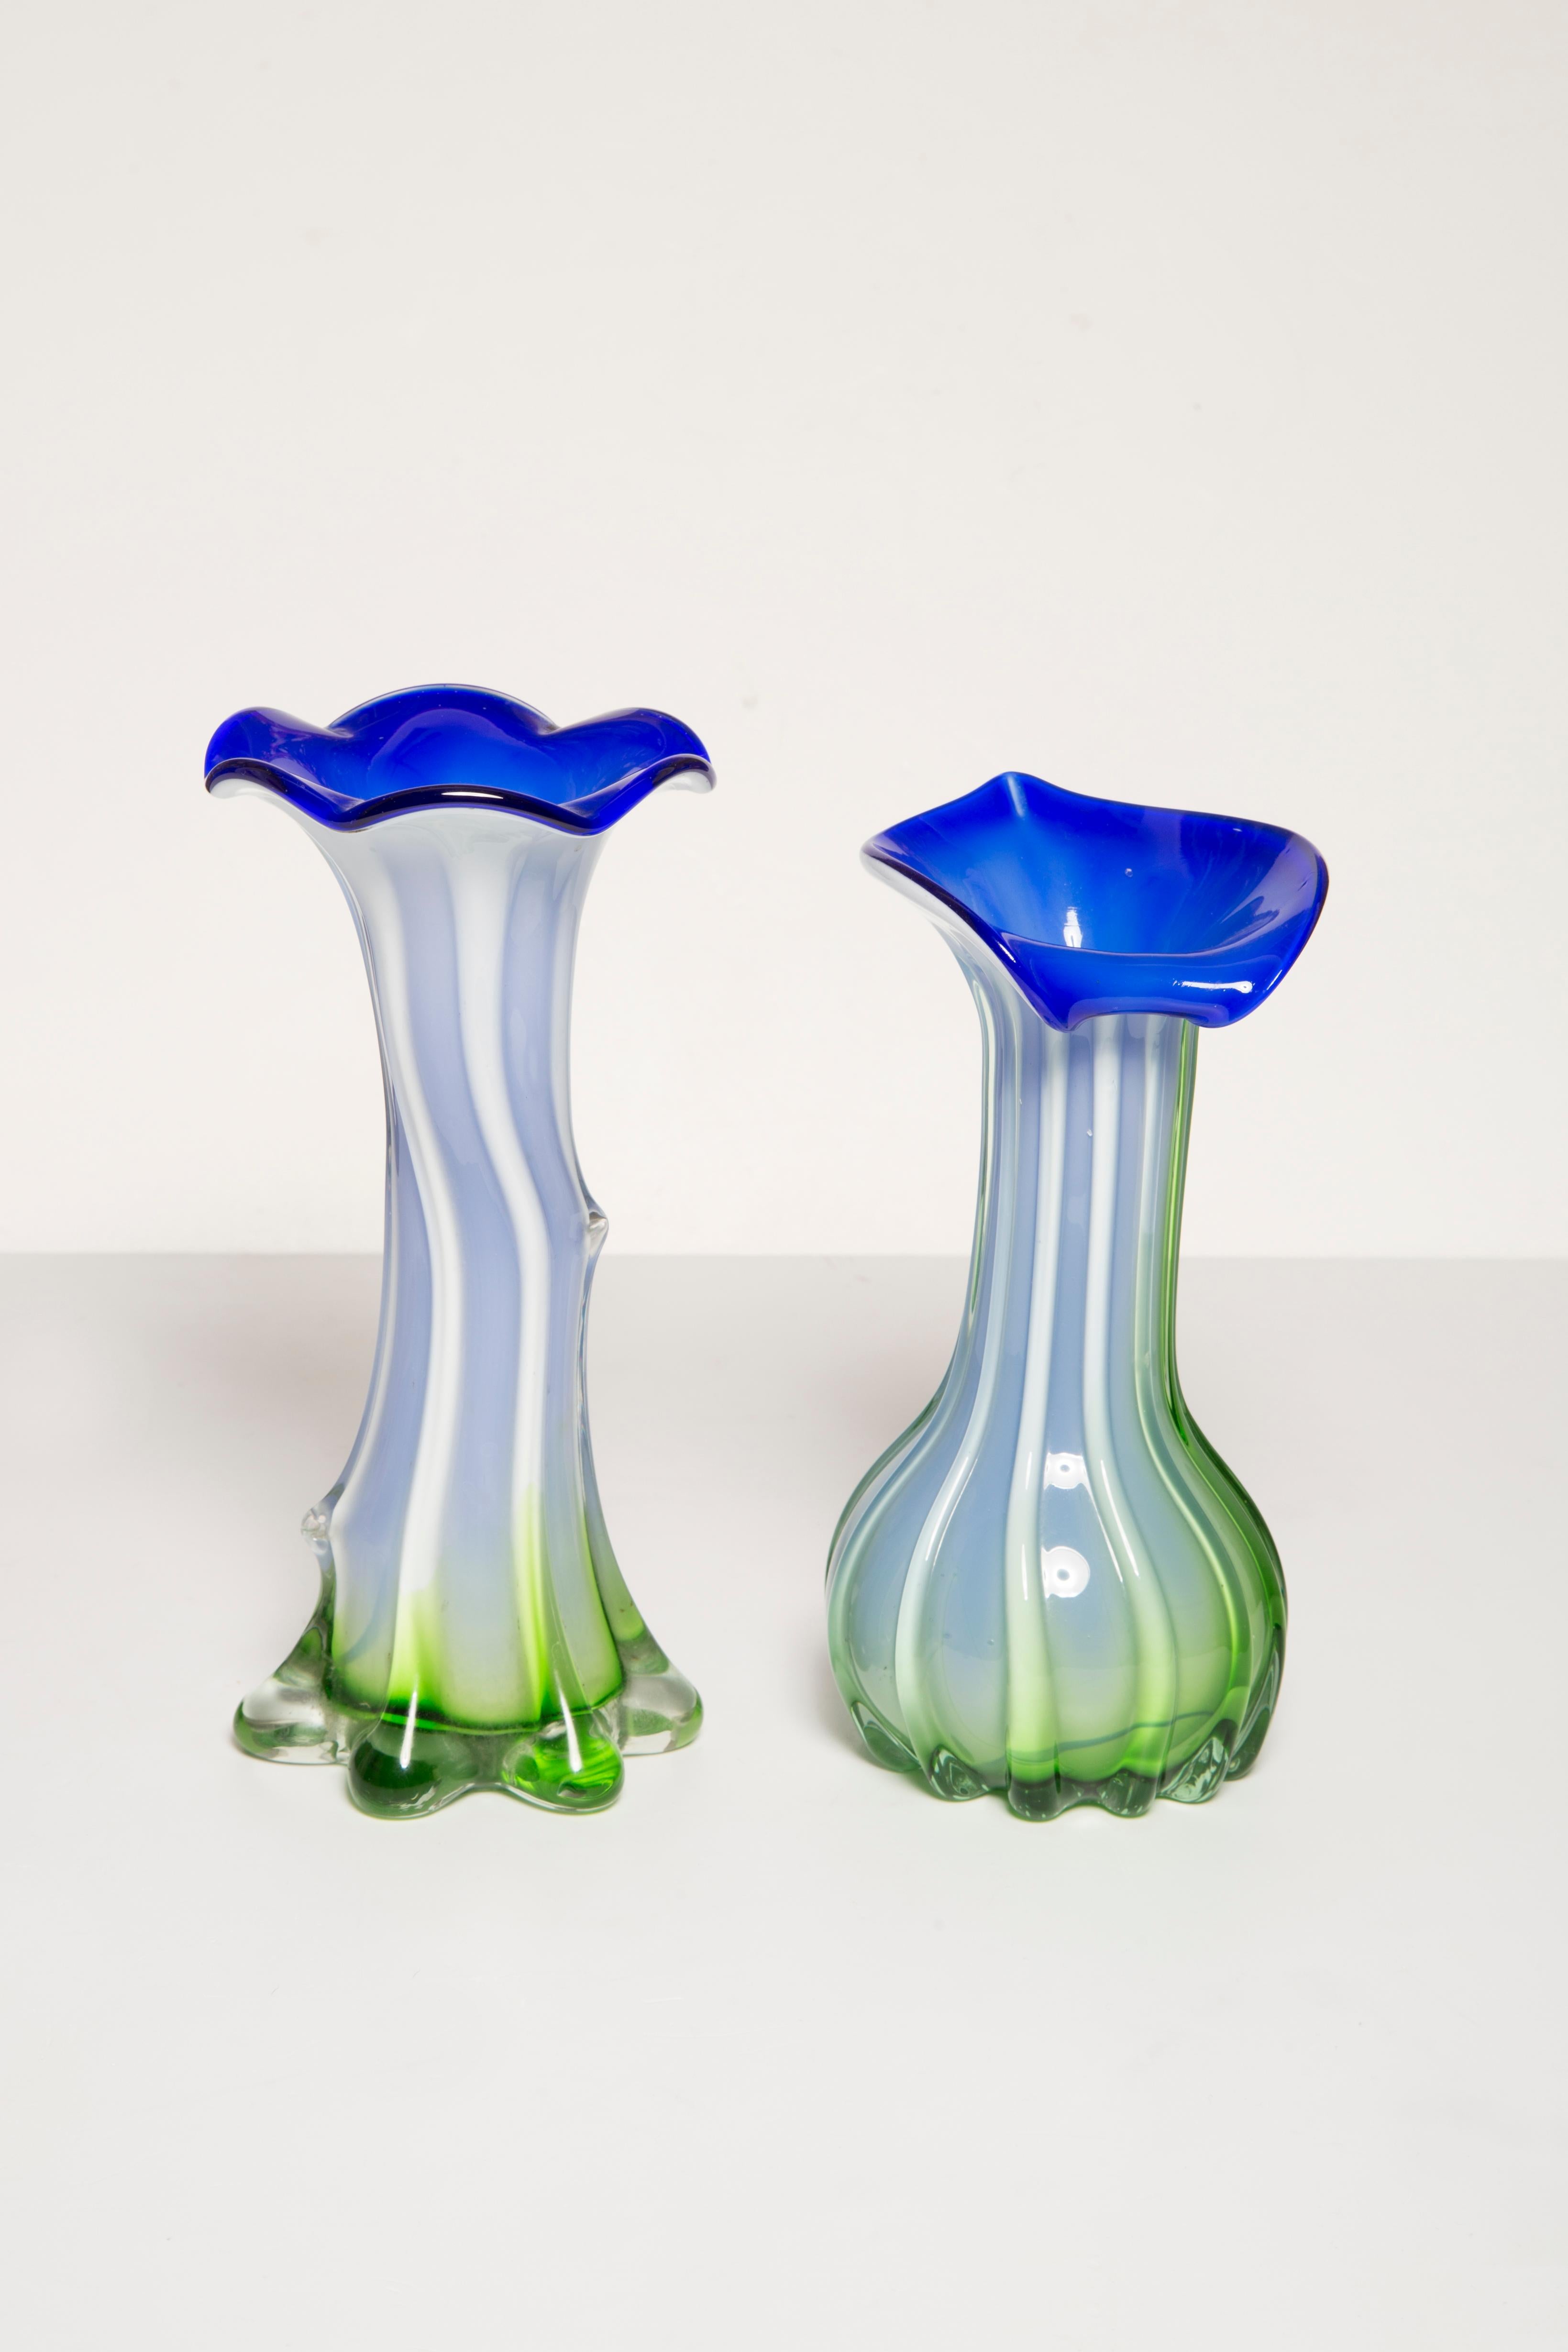 Set of Two Midcentury Vintage Green and Blue Murano Vases, Italy, 1960s For Sale 2